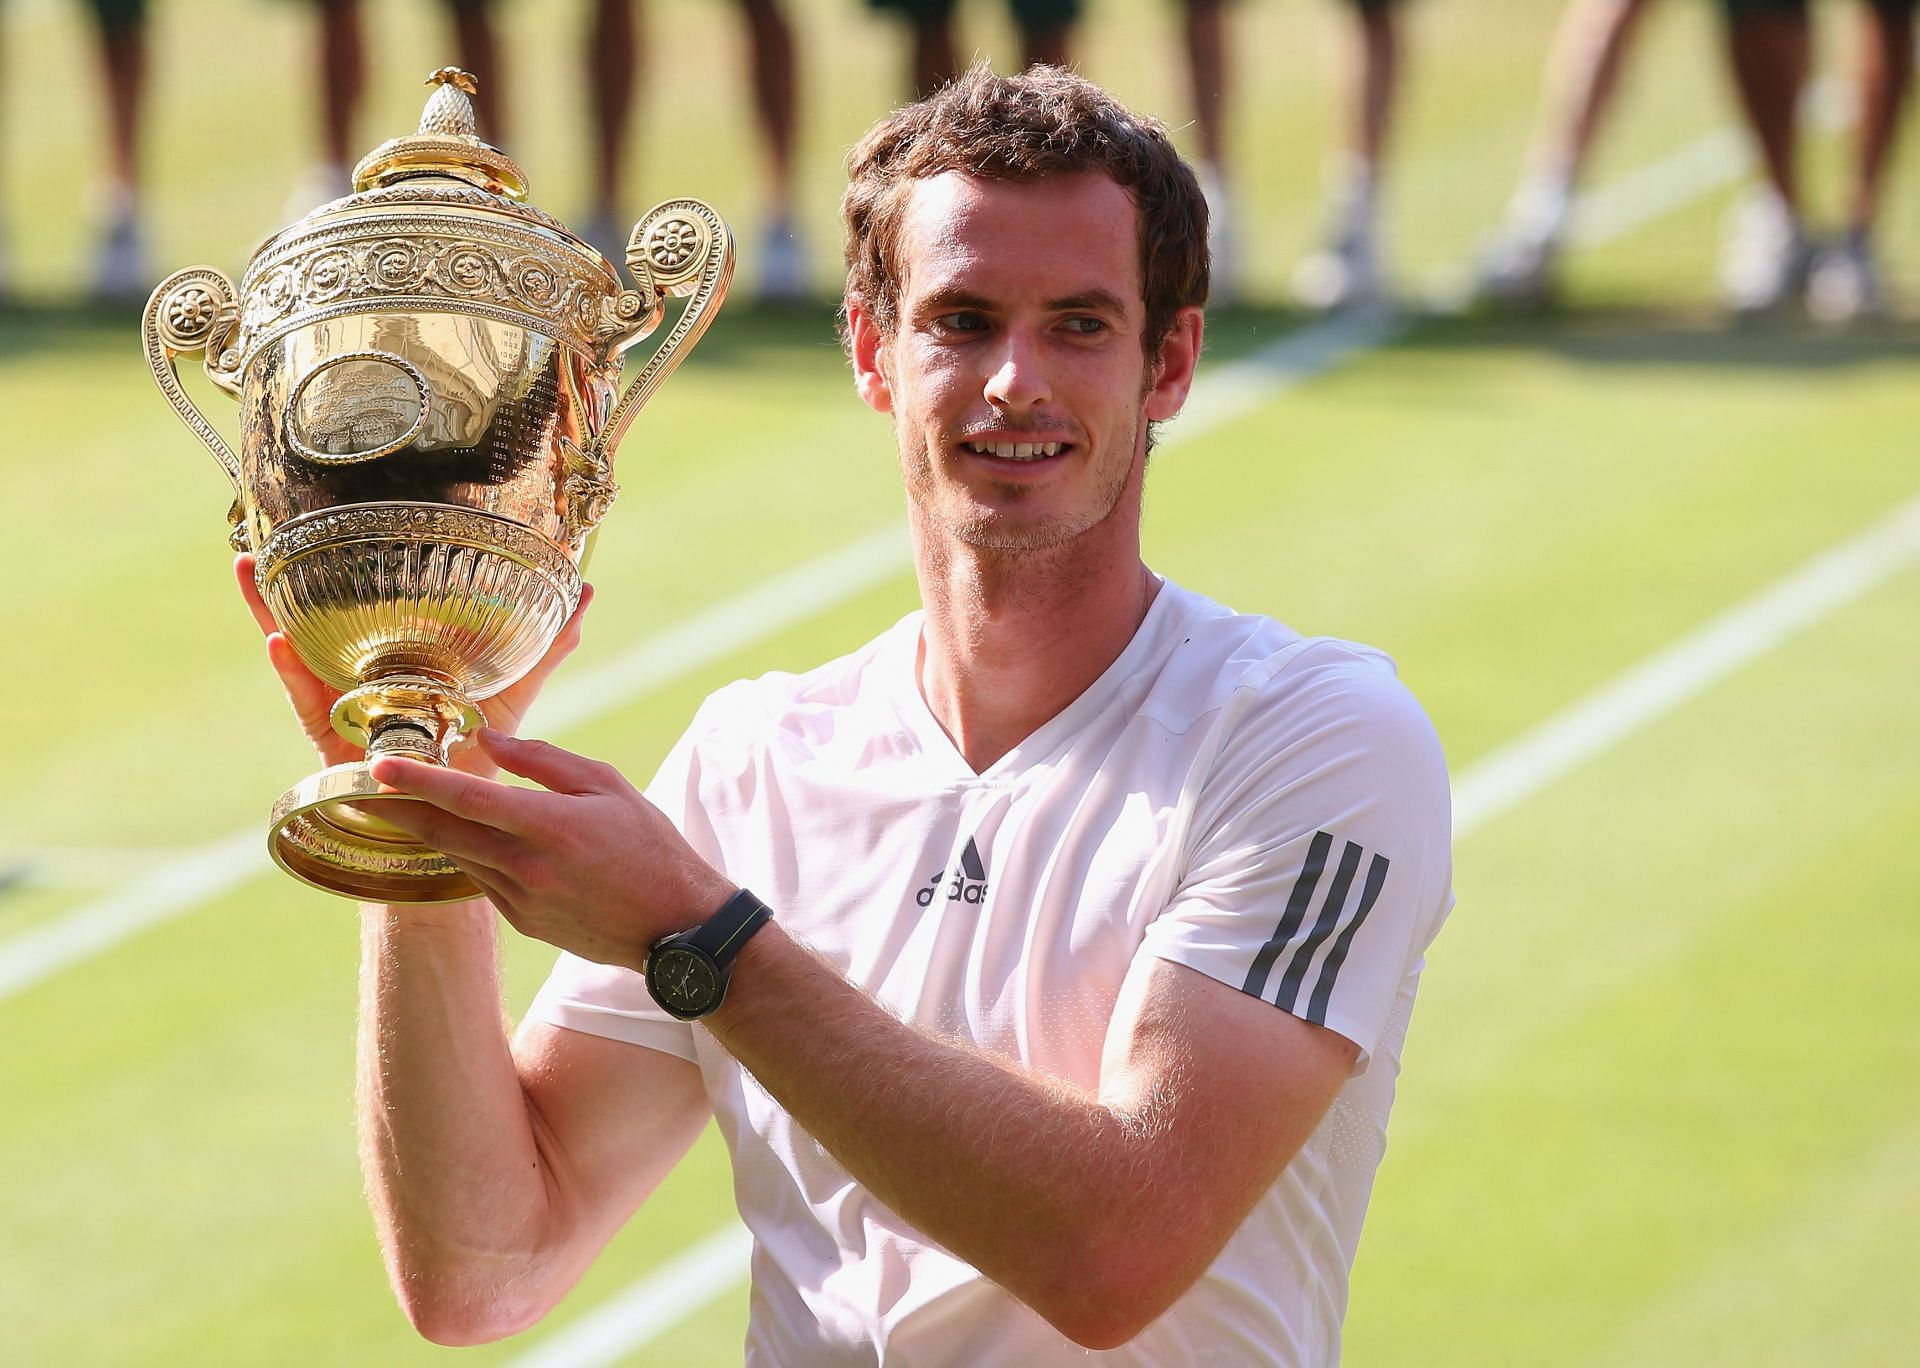 Murray pictured with the Wimbledon 2013 trophy